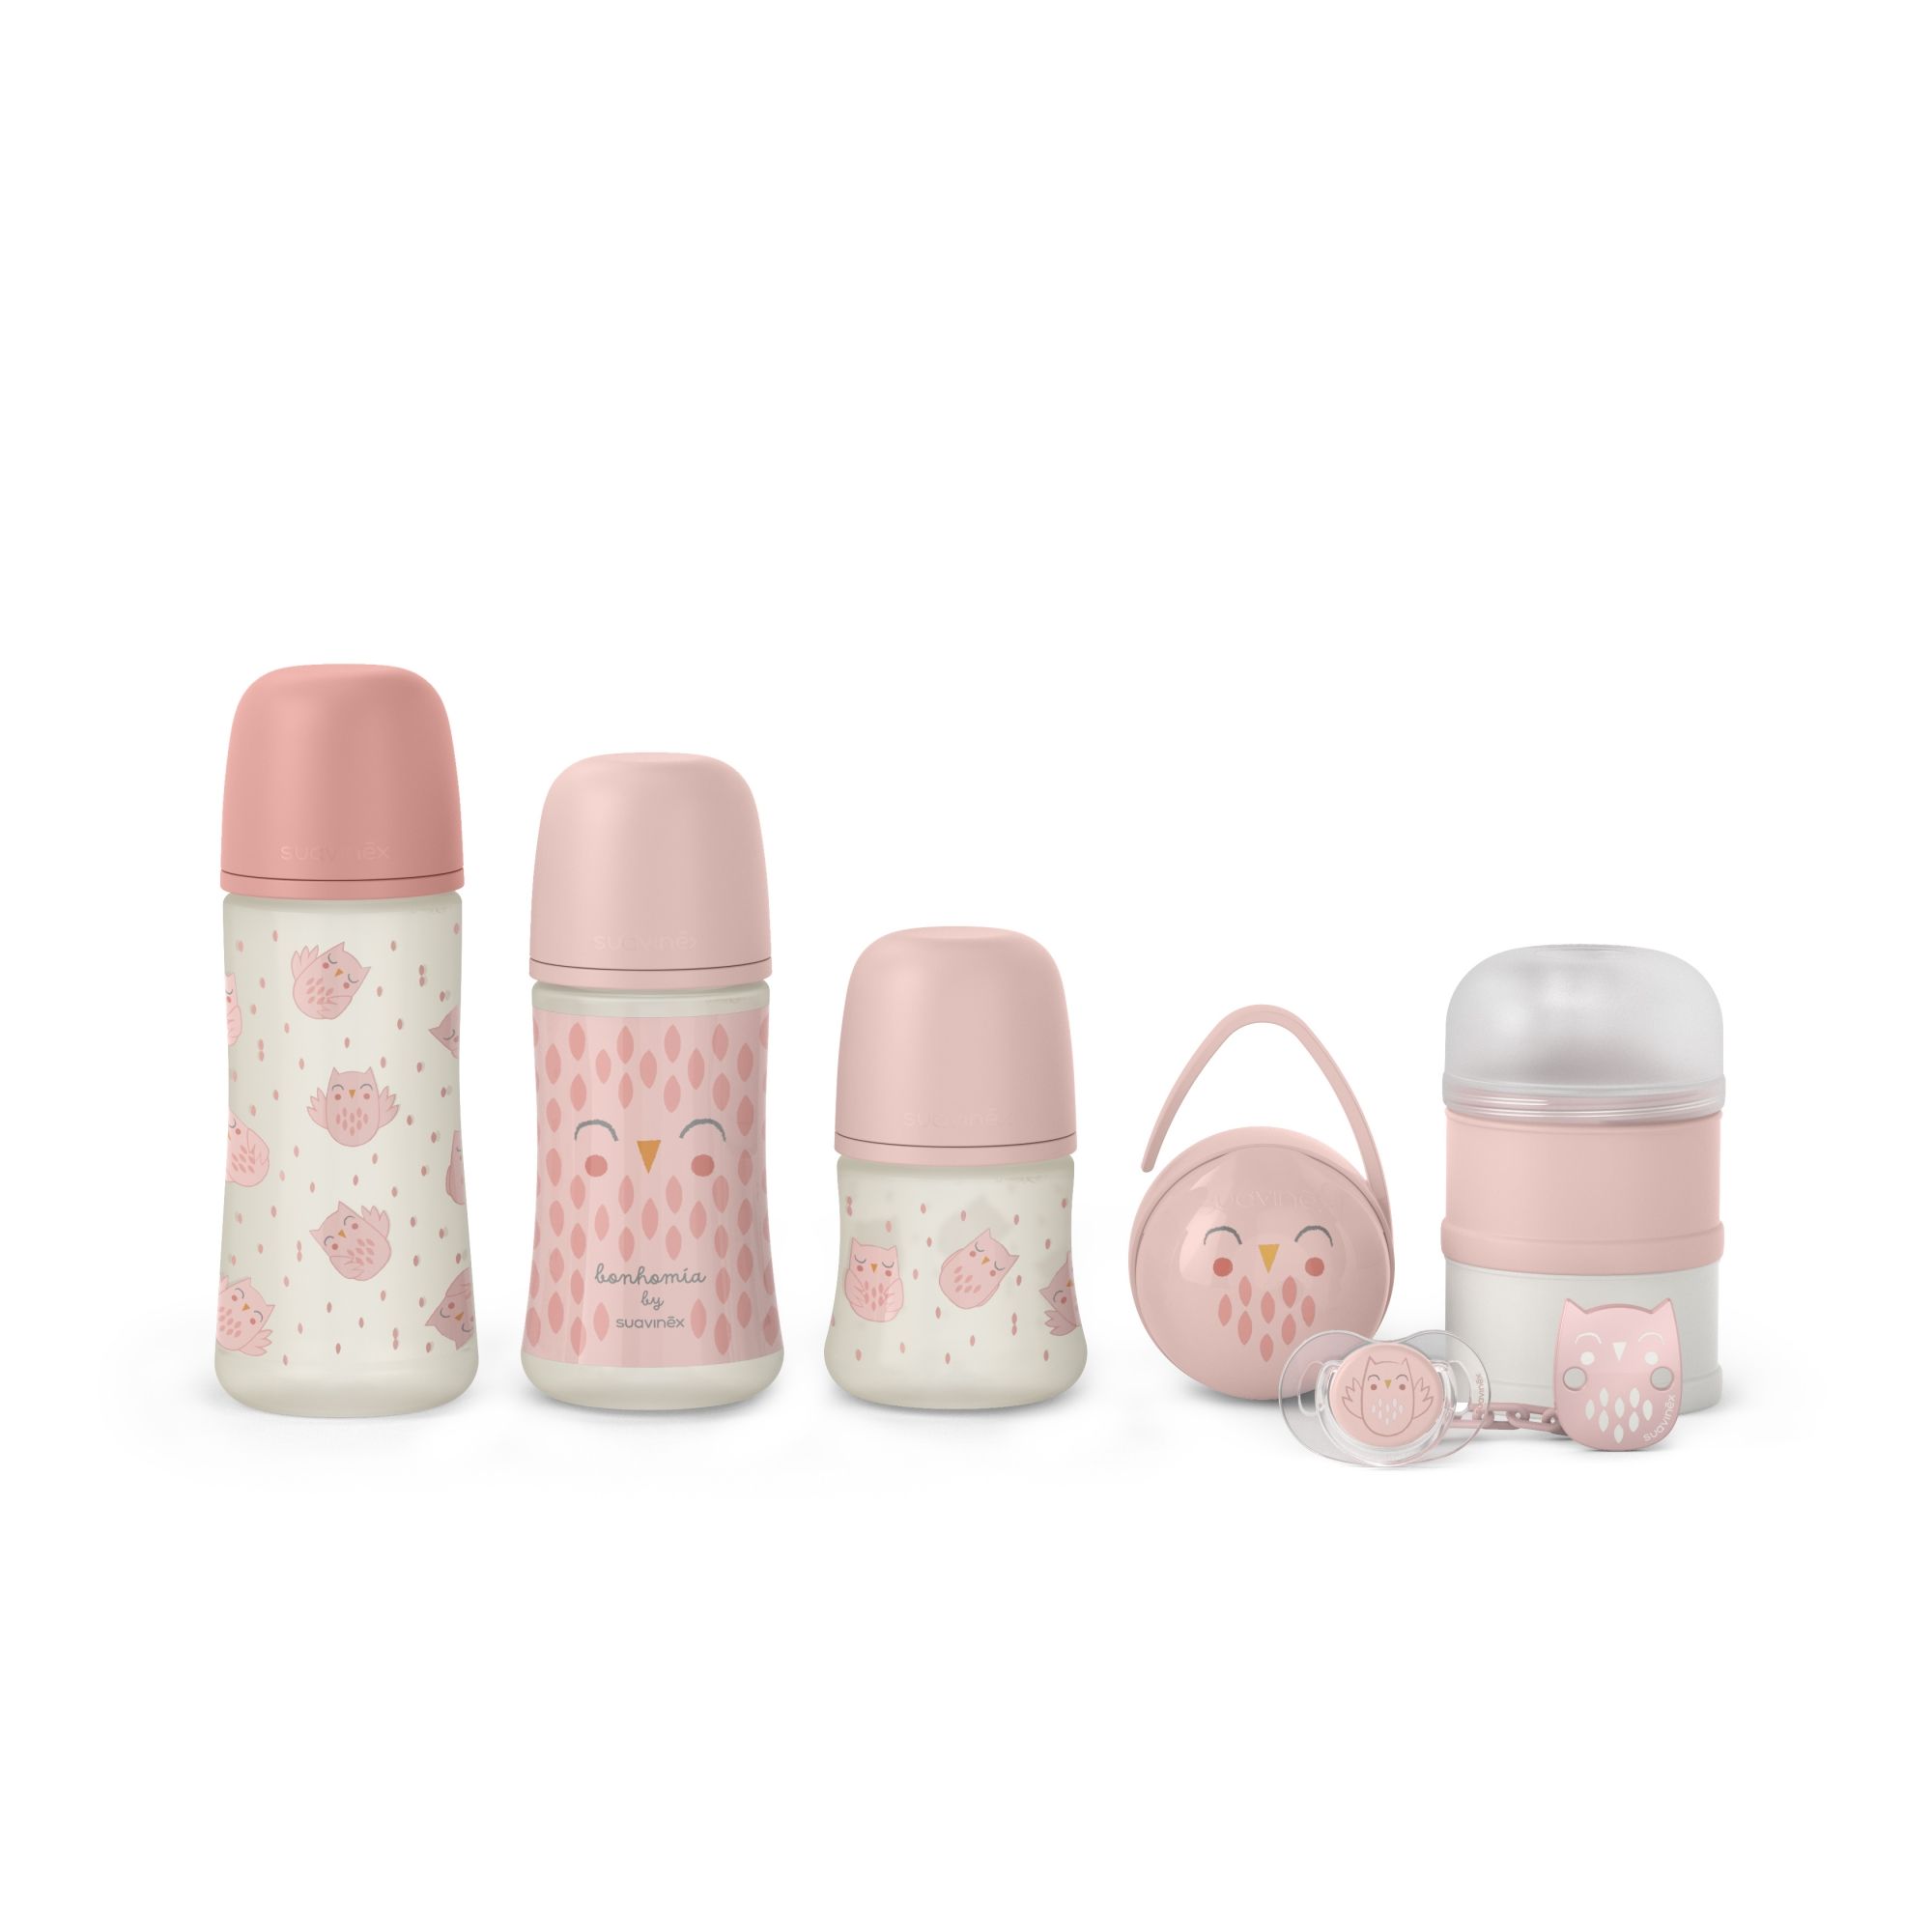 Coffret naissance welcome baby set bonhomia rose - Made in Bébé